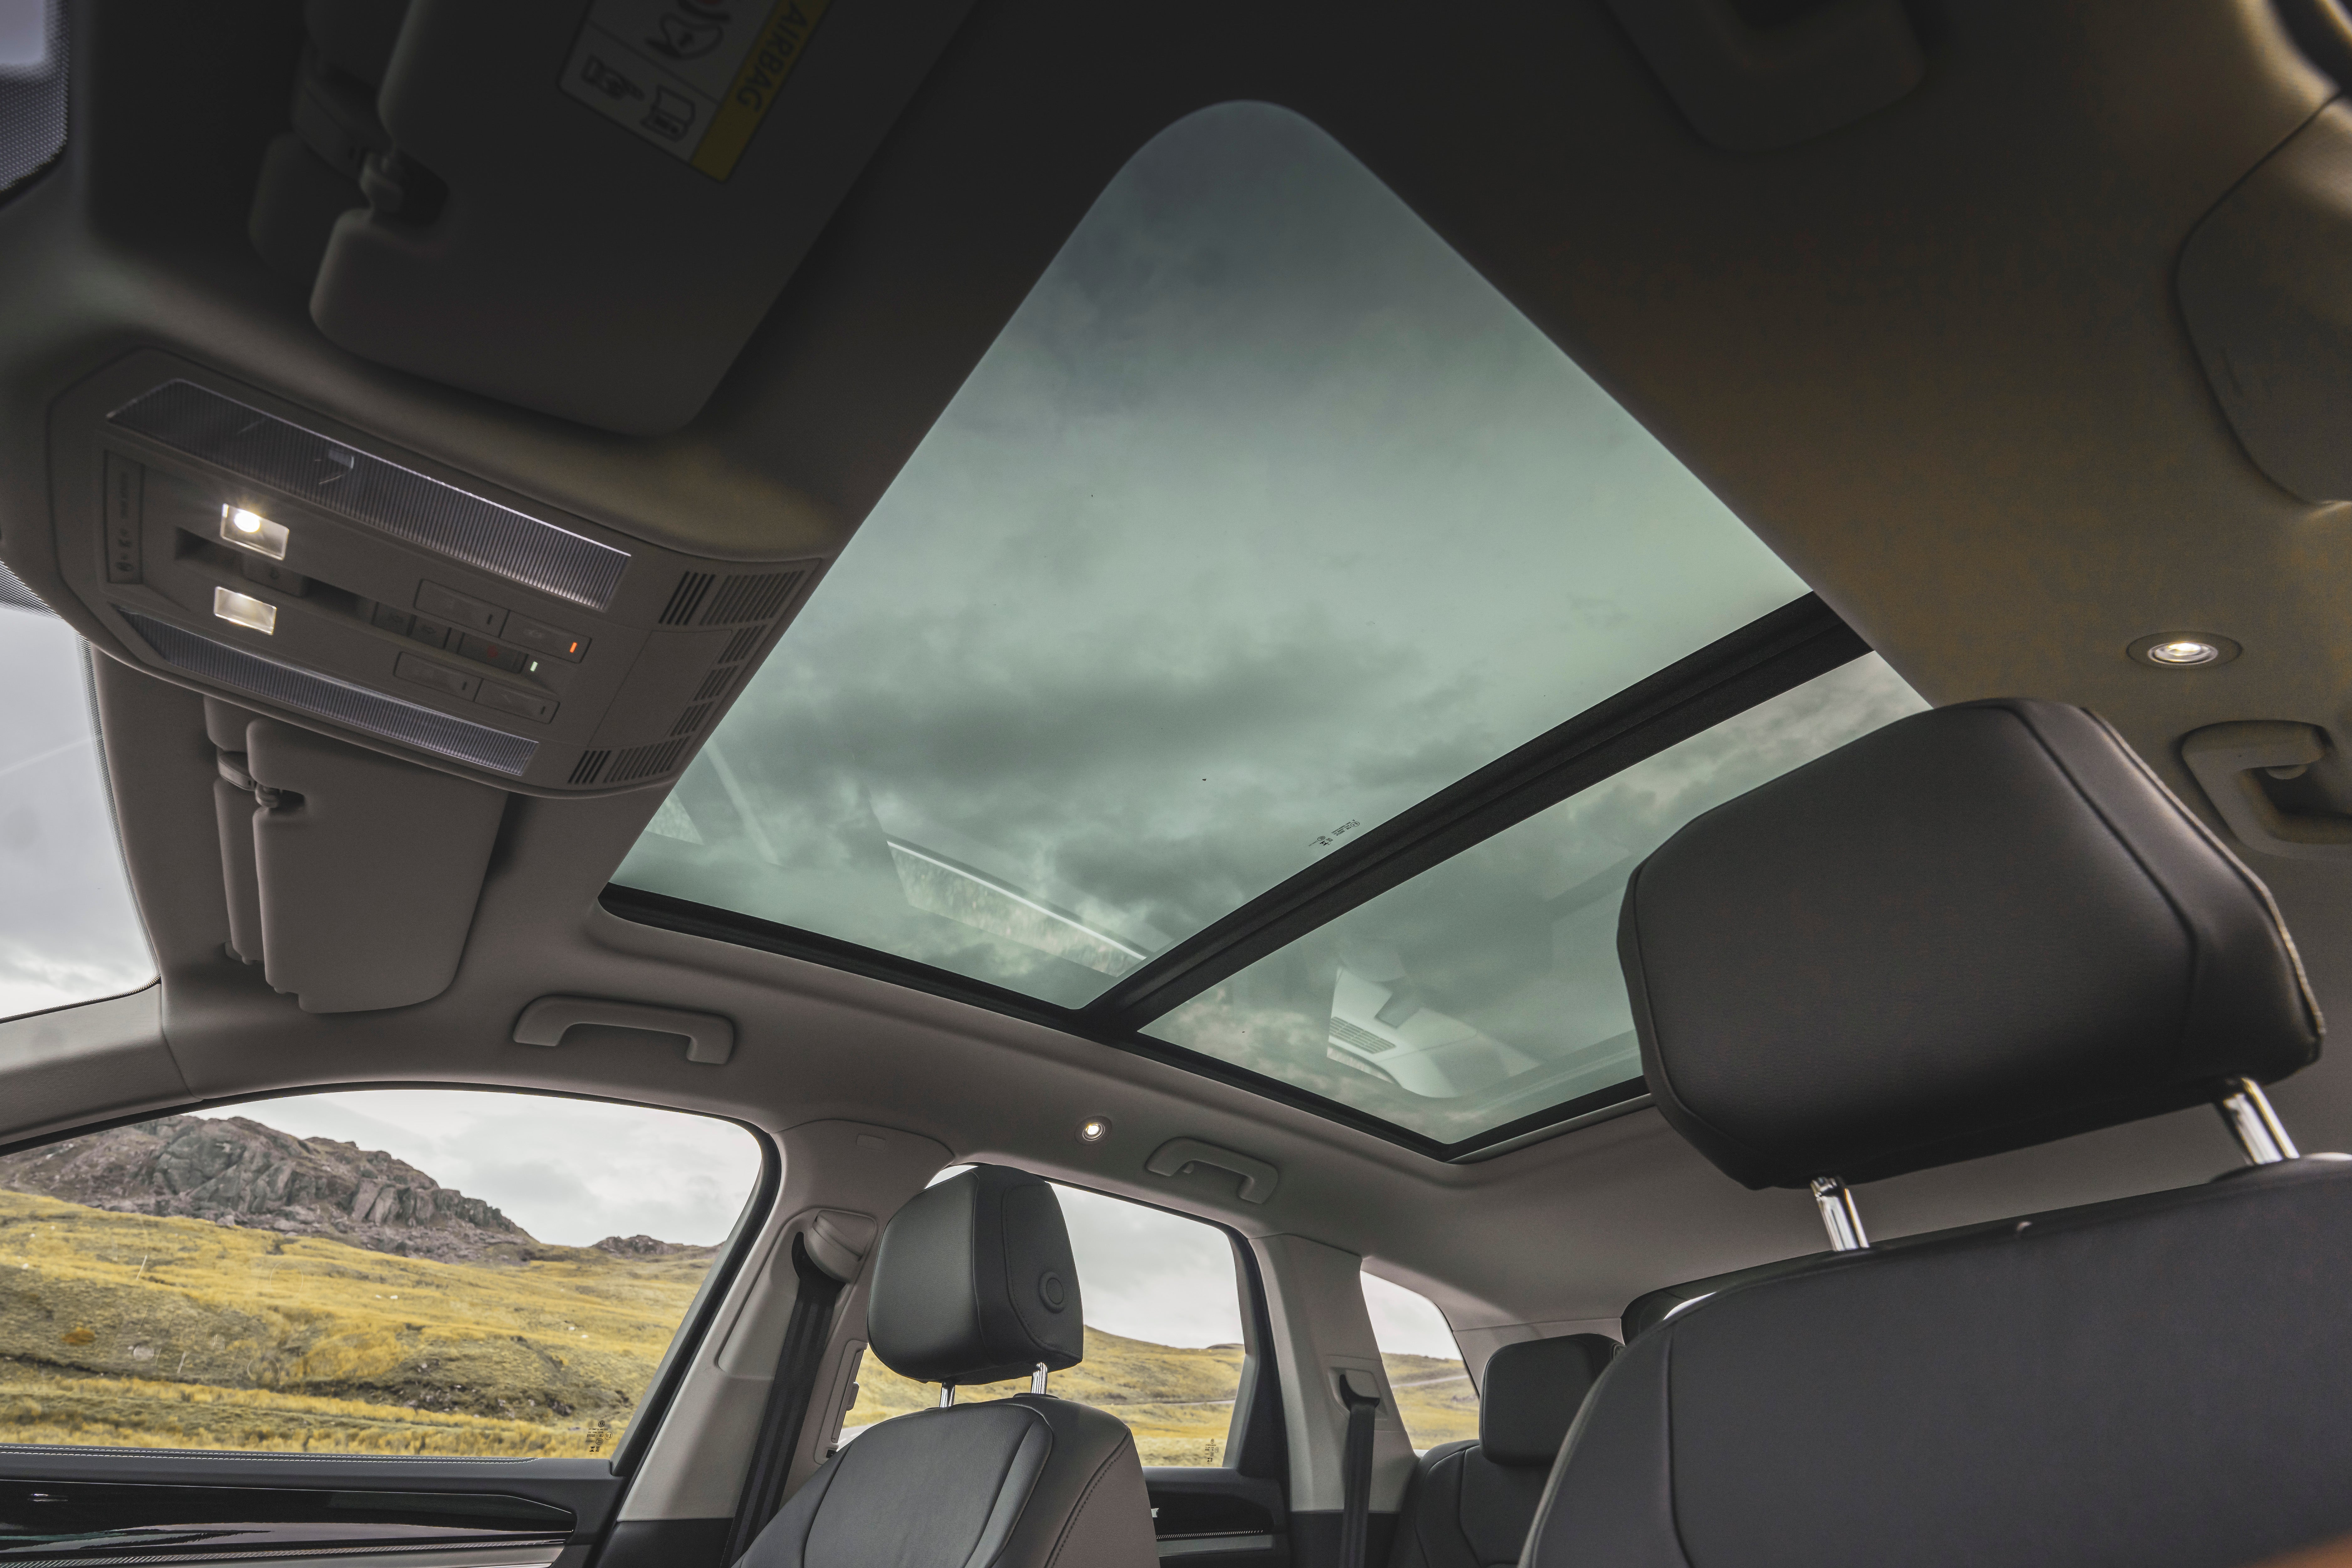 Backseat viewer: the tilting and sliding panoramic sunroof covers almost the entire roof